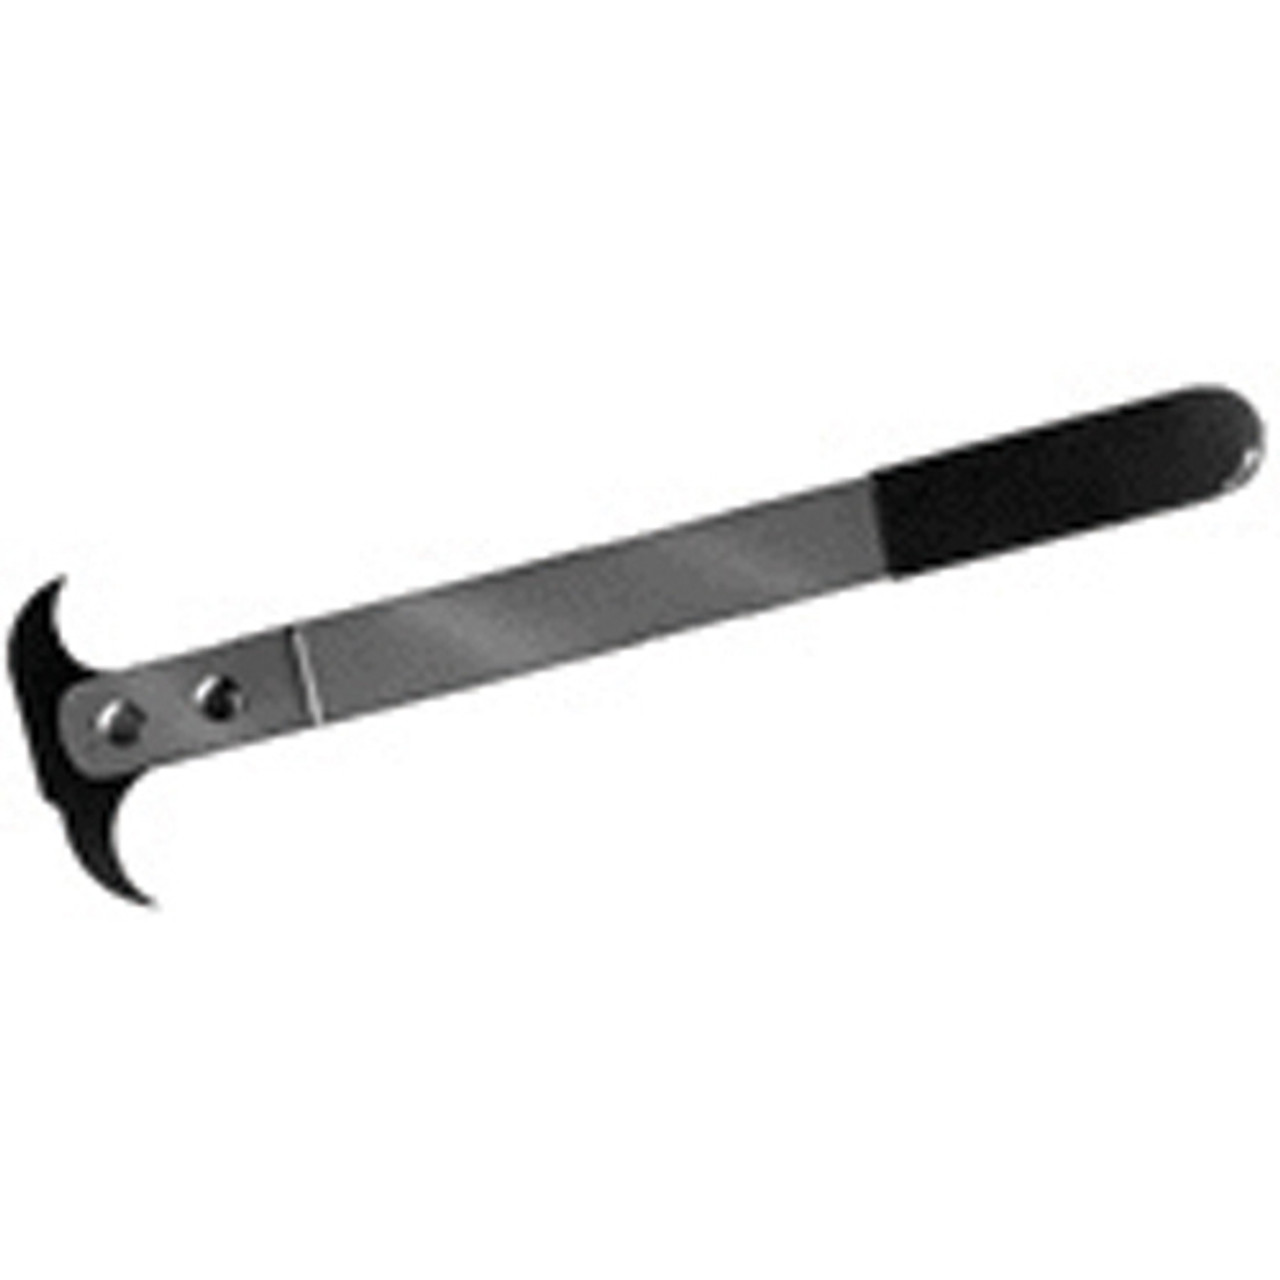 Lisle 56750 Seal Puller, for Oil and Grease Seals JB Tools